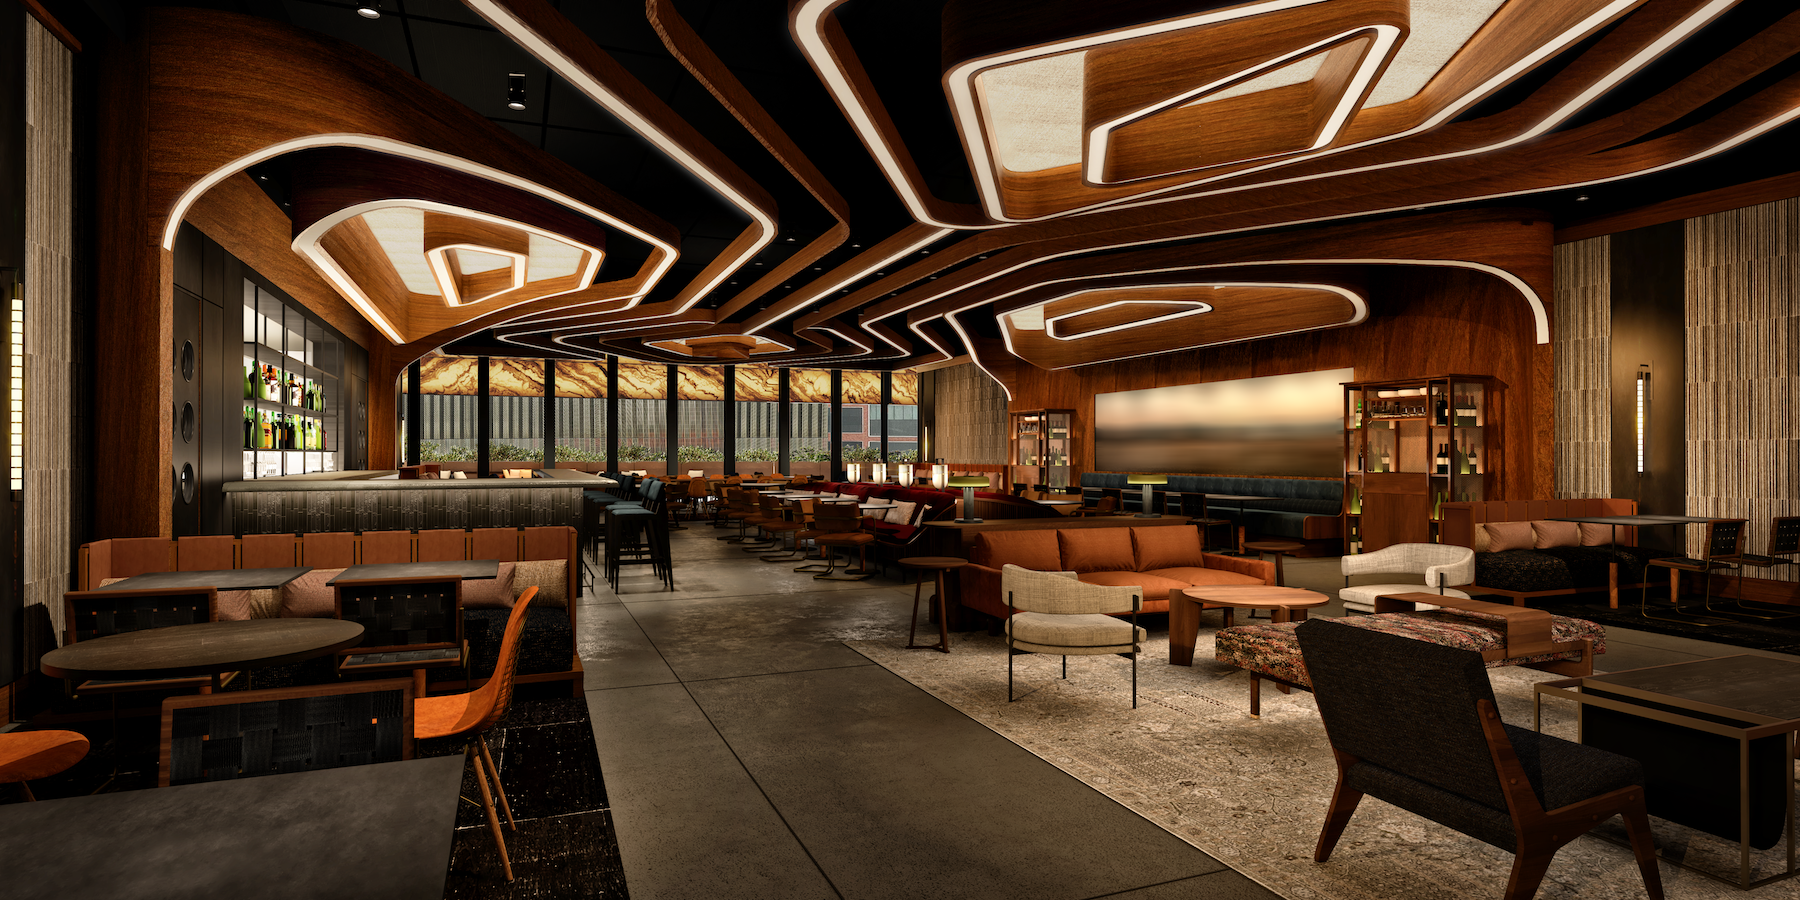 A rendering of the PAC's restaurant